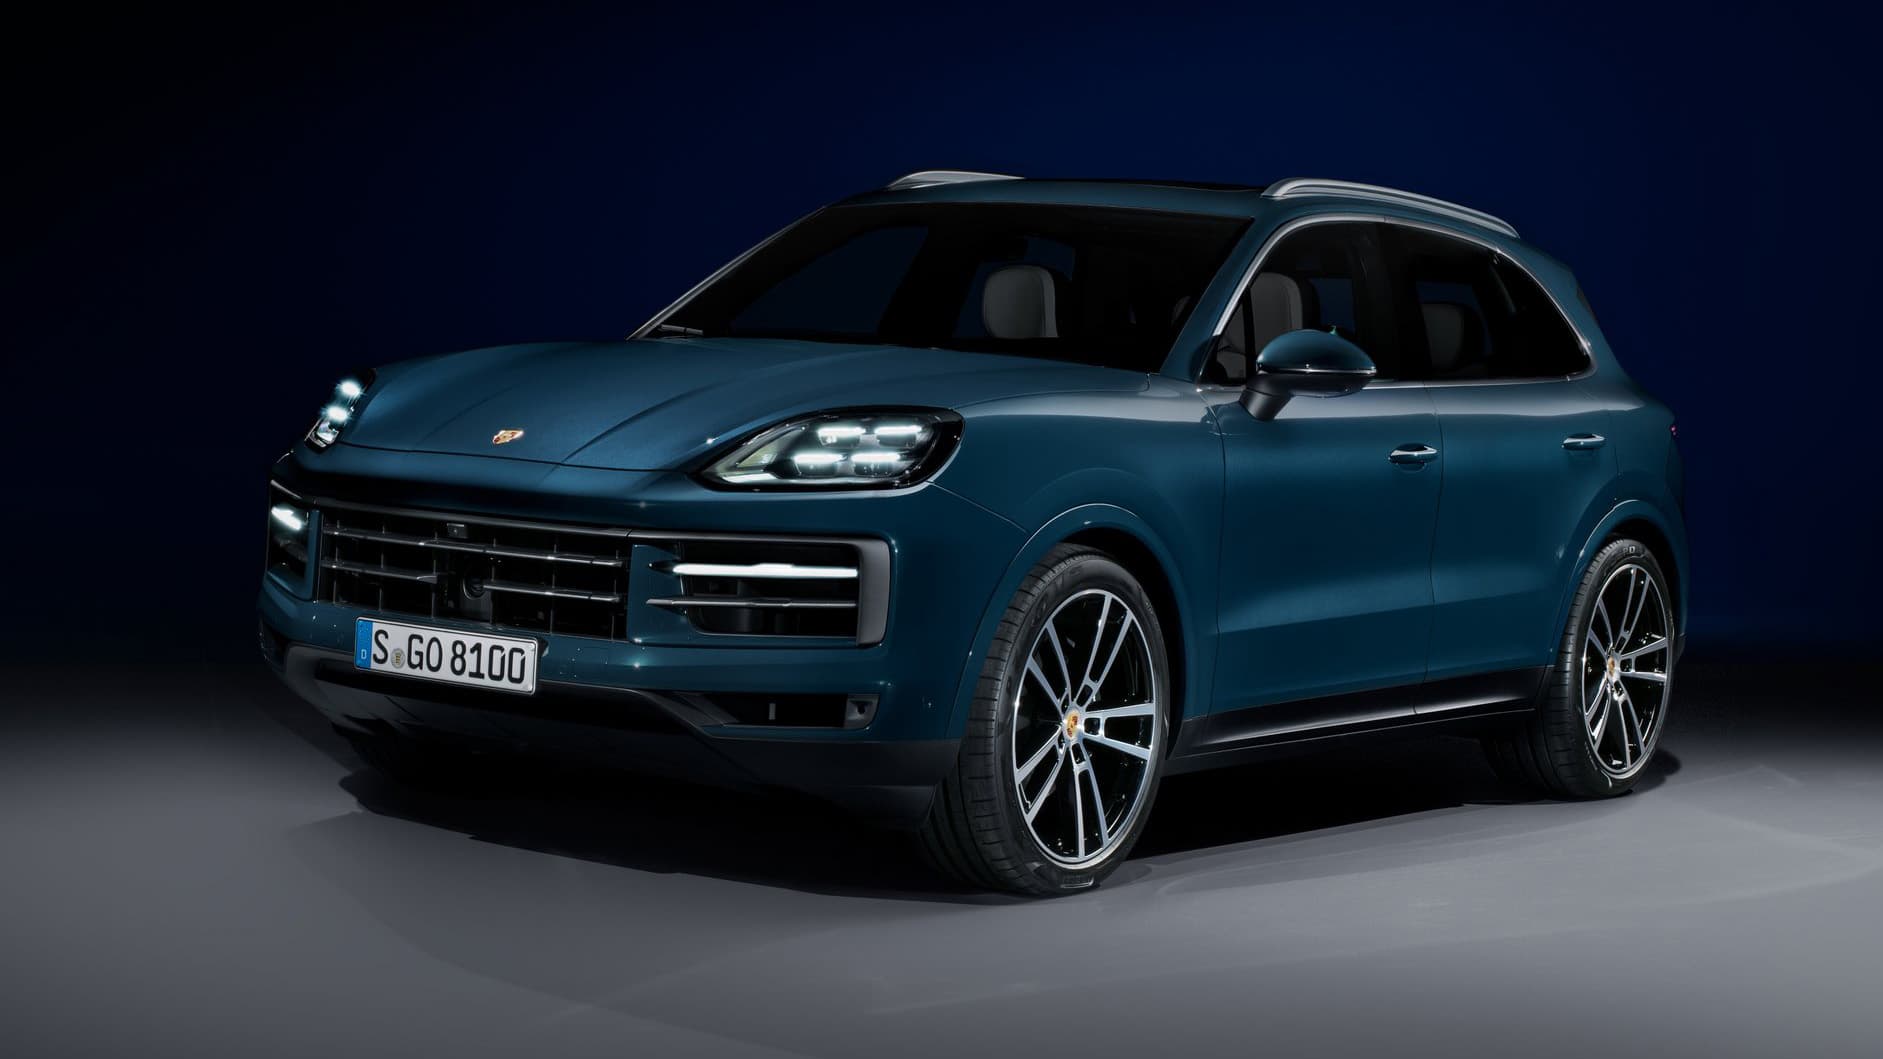 You've seen inside the new Porsche Cayenne: now here's the rest of